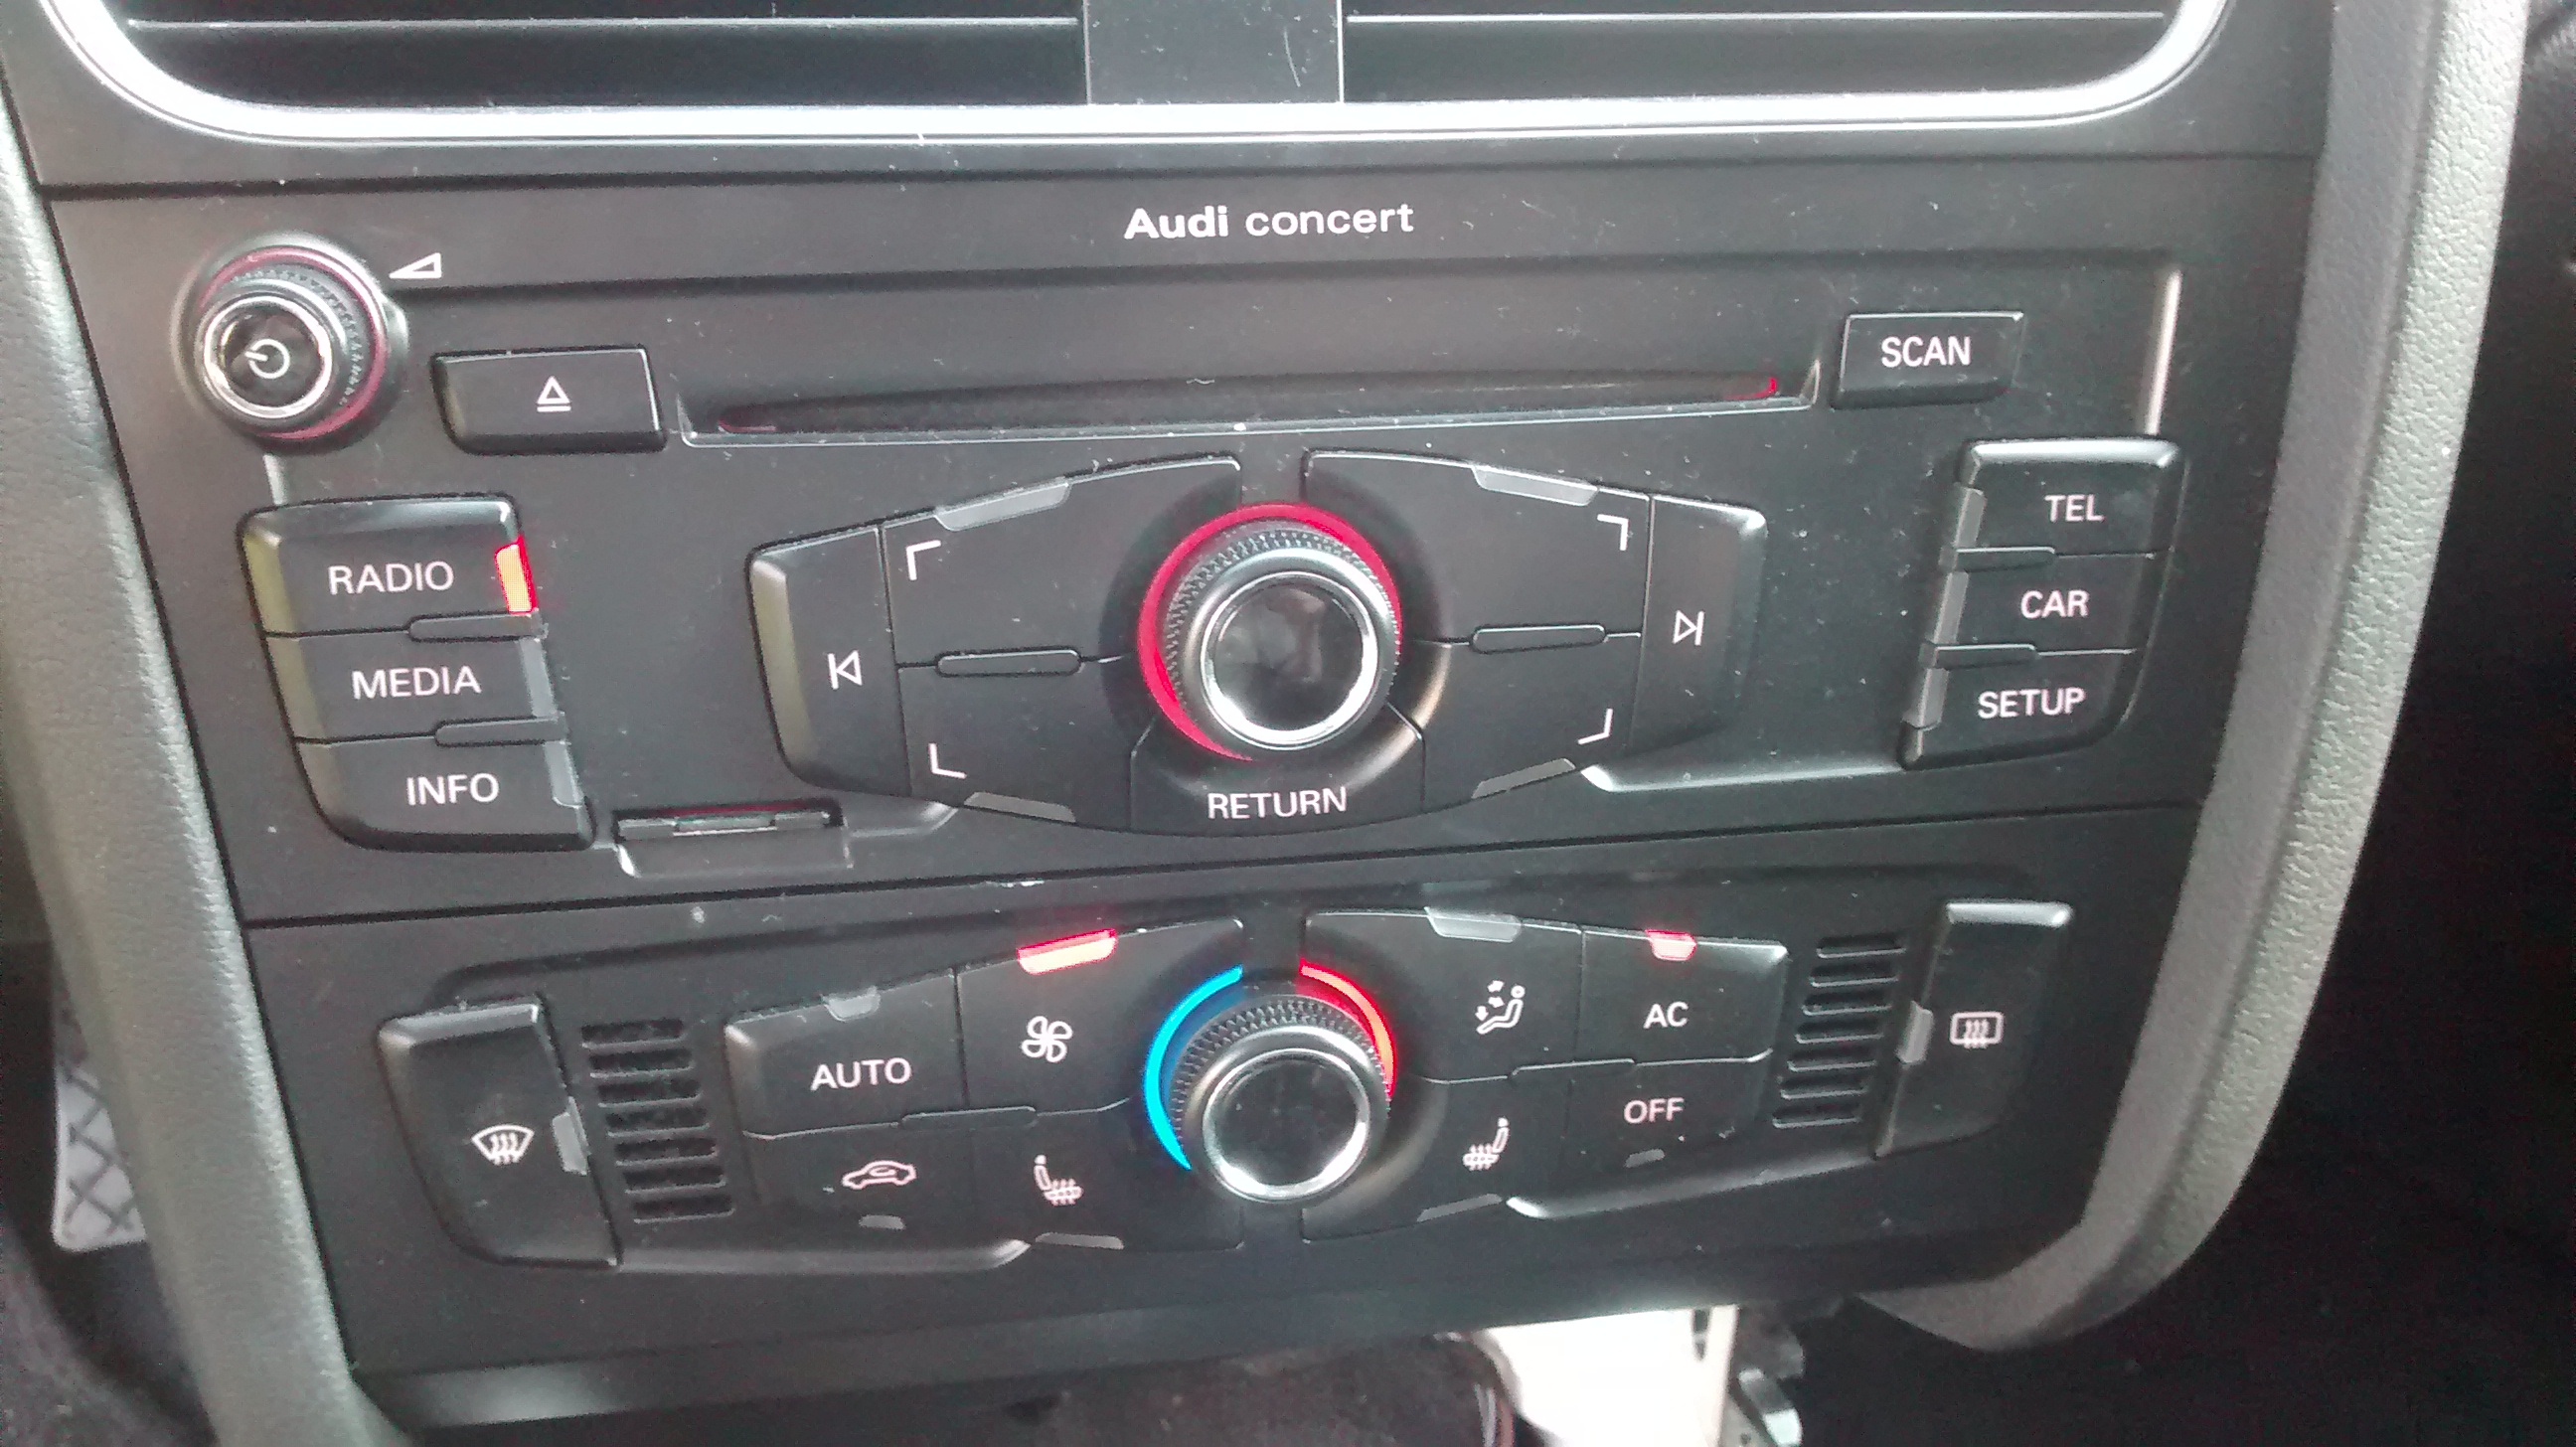 Audi a4 b8 concert stereo upgrade